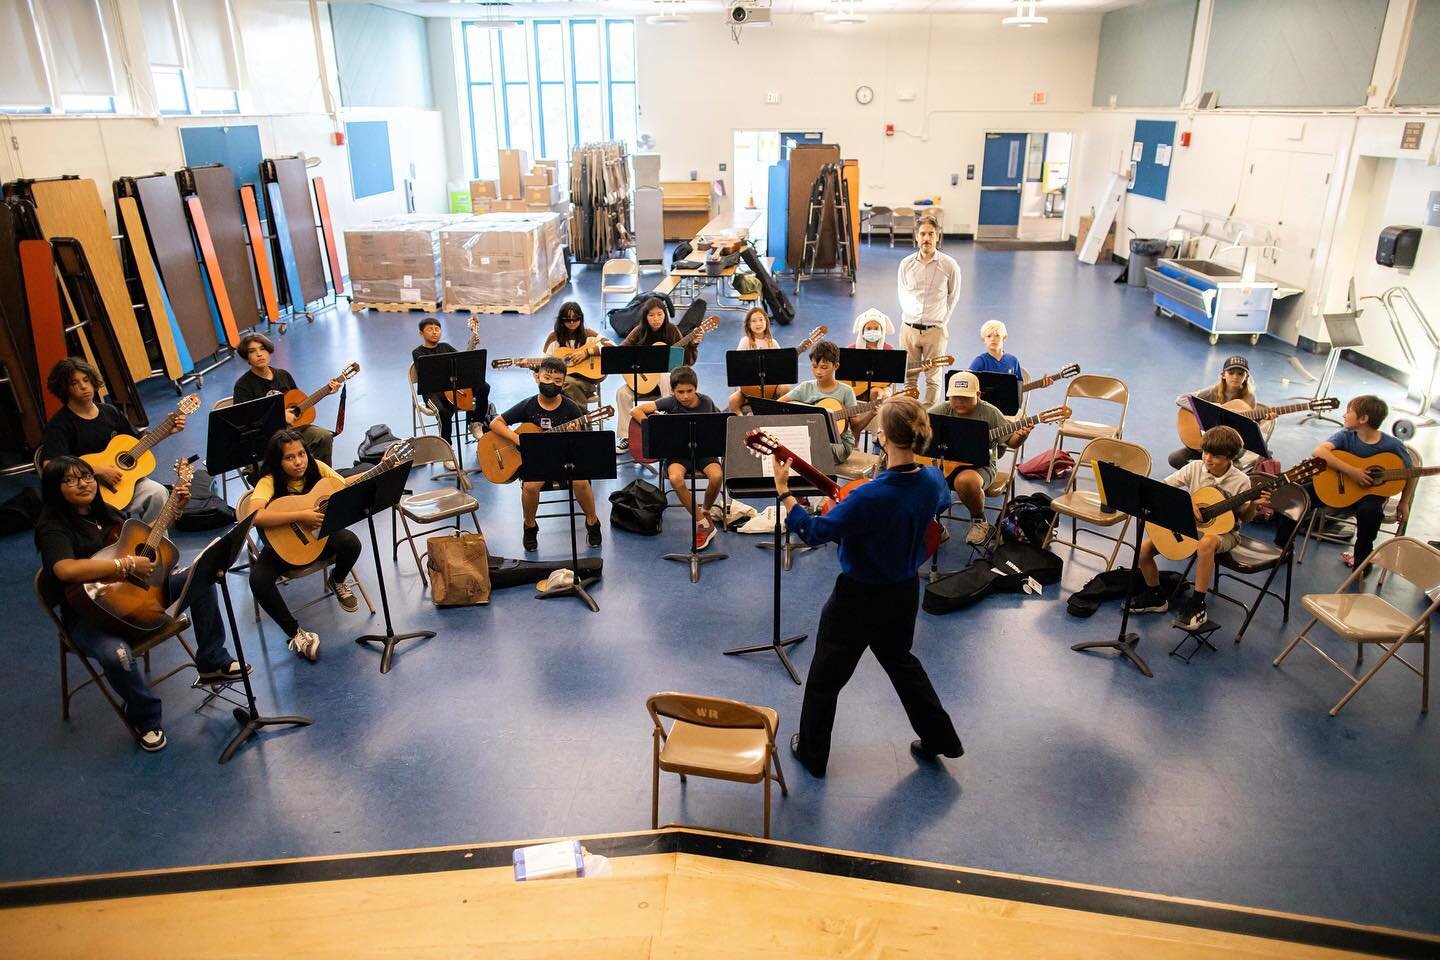 🍂 It's hard to believe that we're already halfway through our fall rehearsals! 

🎵 Many of our students have performances later this fall and everyone has been working hard to prepare their pieces! It's fun to hear their progress each week. Practic